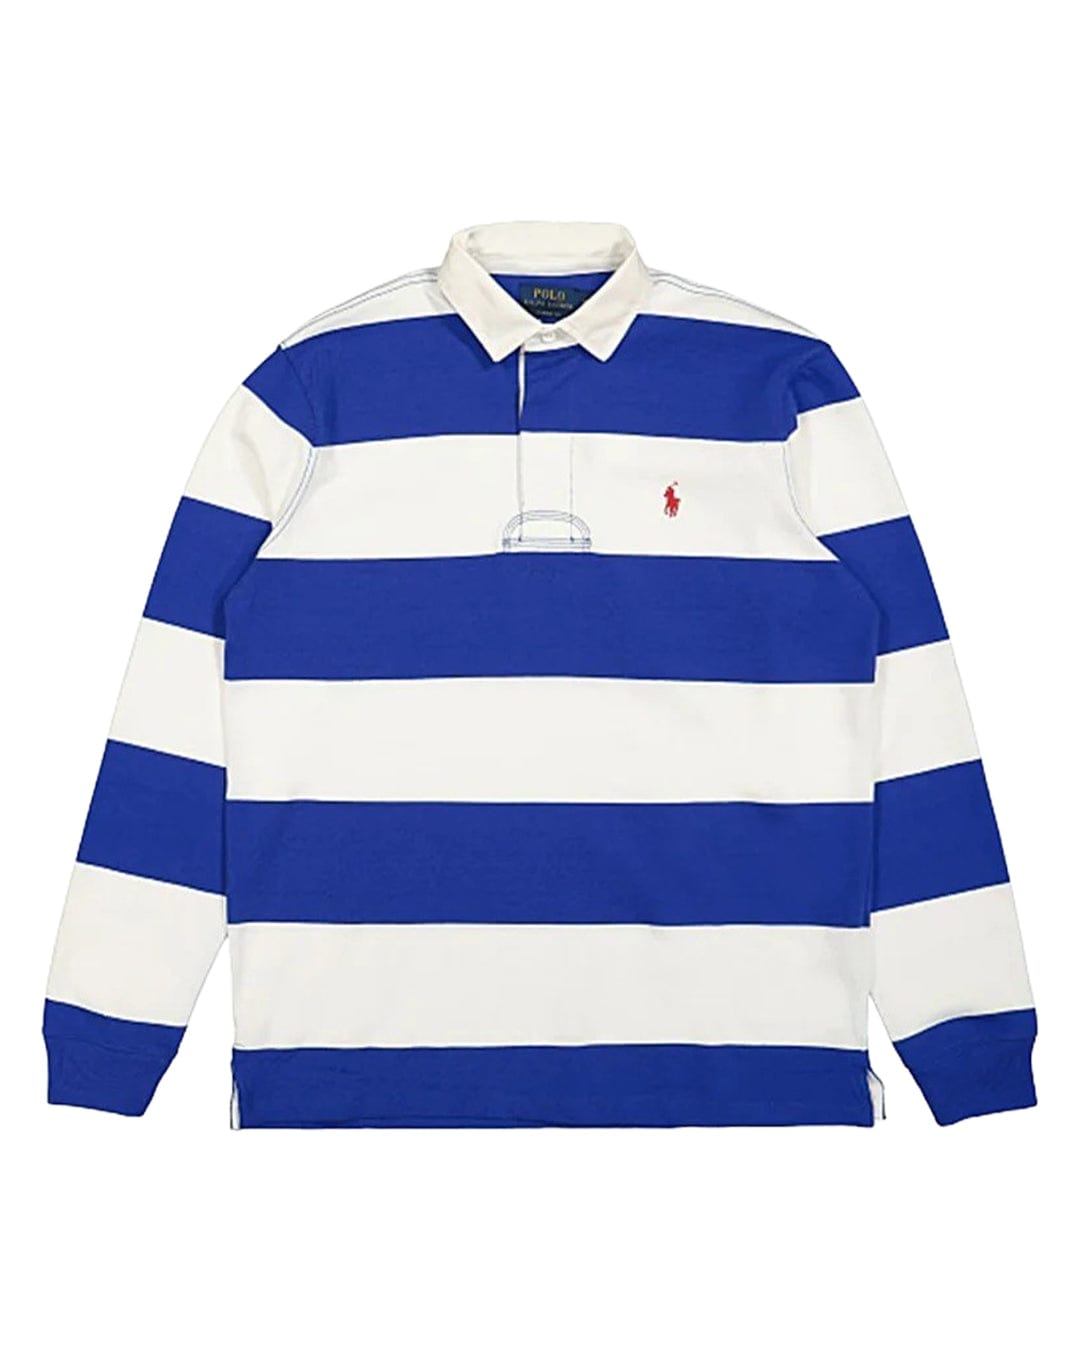 Polo Ralph Lauren Polo Shirts Polo Ralph Lauren Blue And White Striped Rugby Polo Shirt